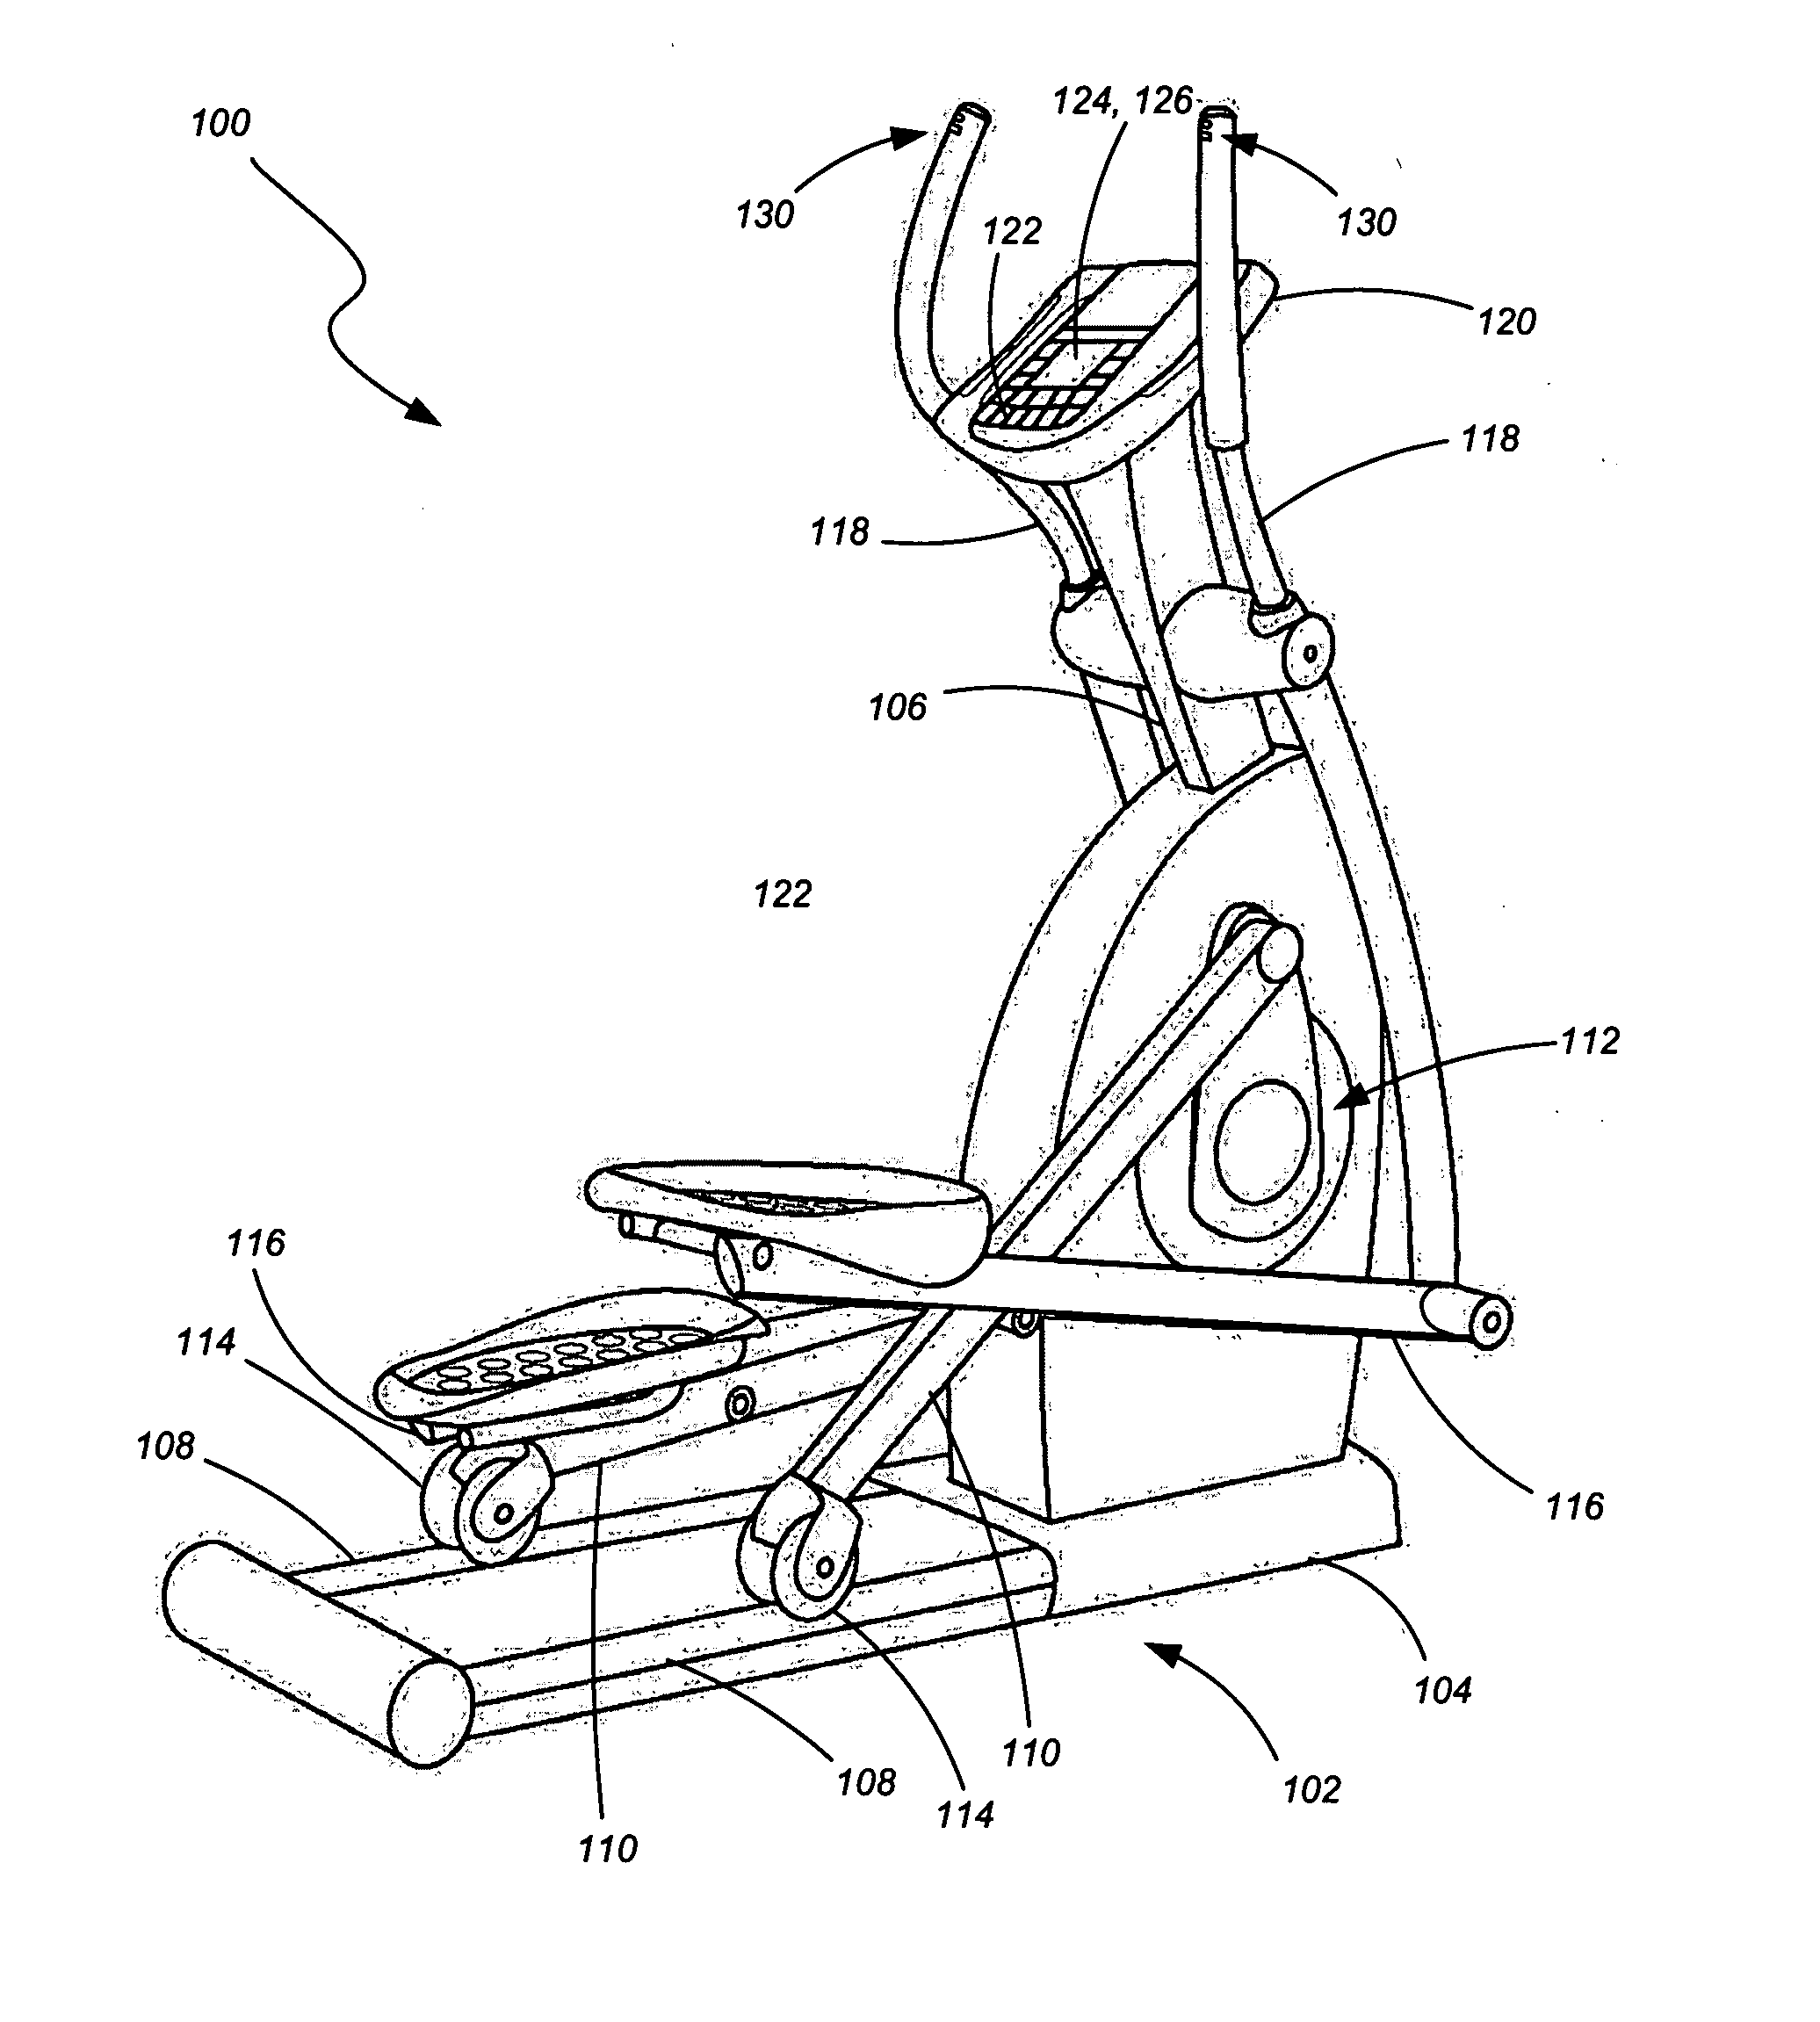 Exercise apparatuses, components for exercise apparatuses and related methods